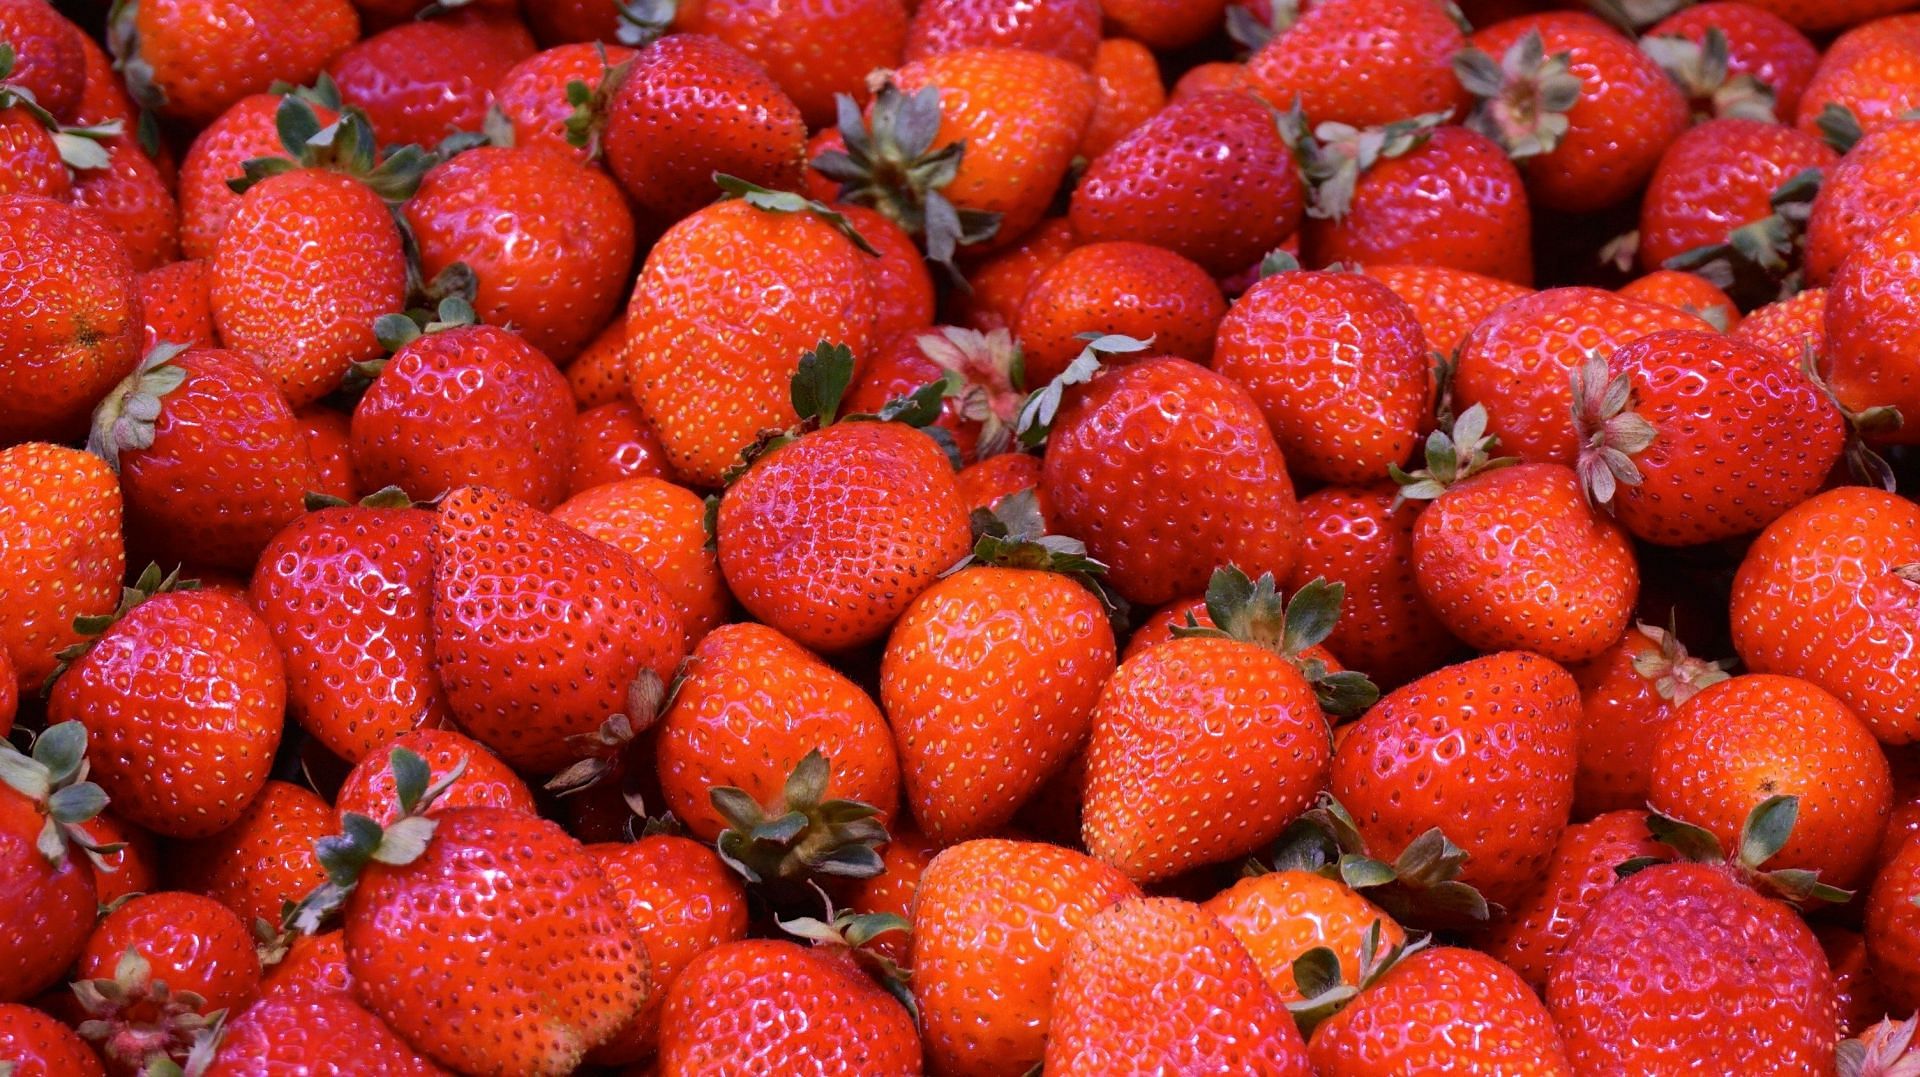 Strawberries are healthy and can be consumed everyday to improve heart health. (Image via Pexels / Pixabay)